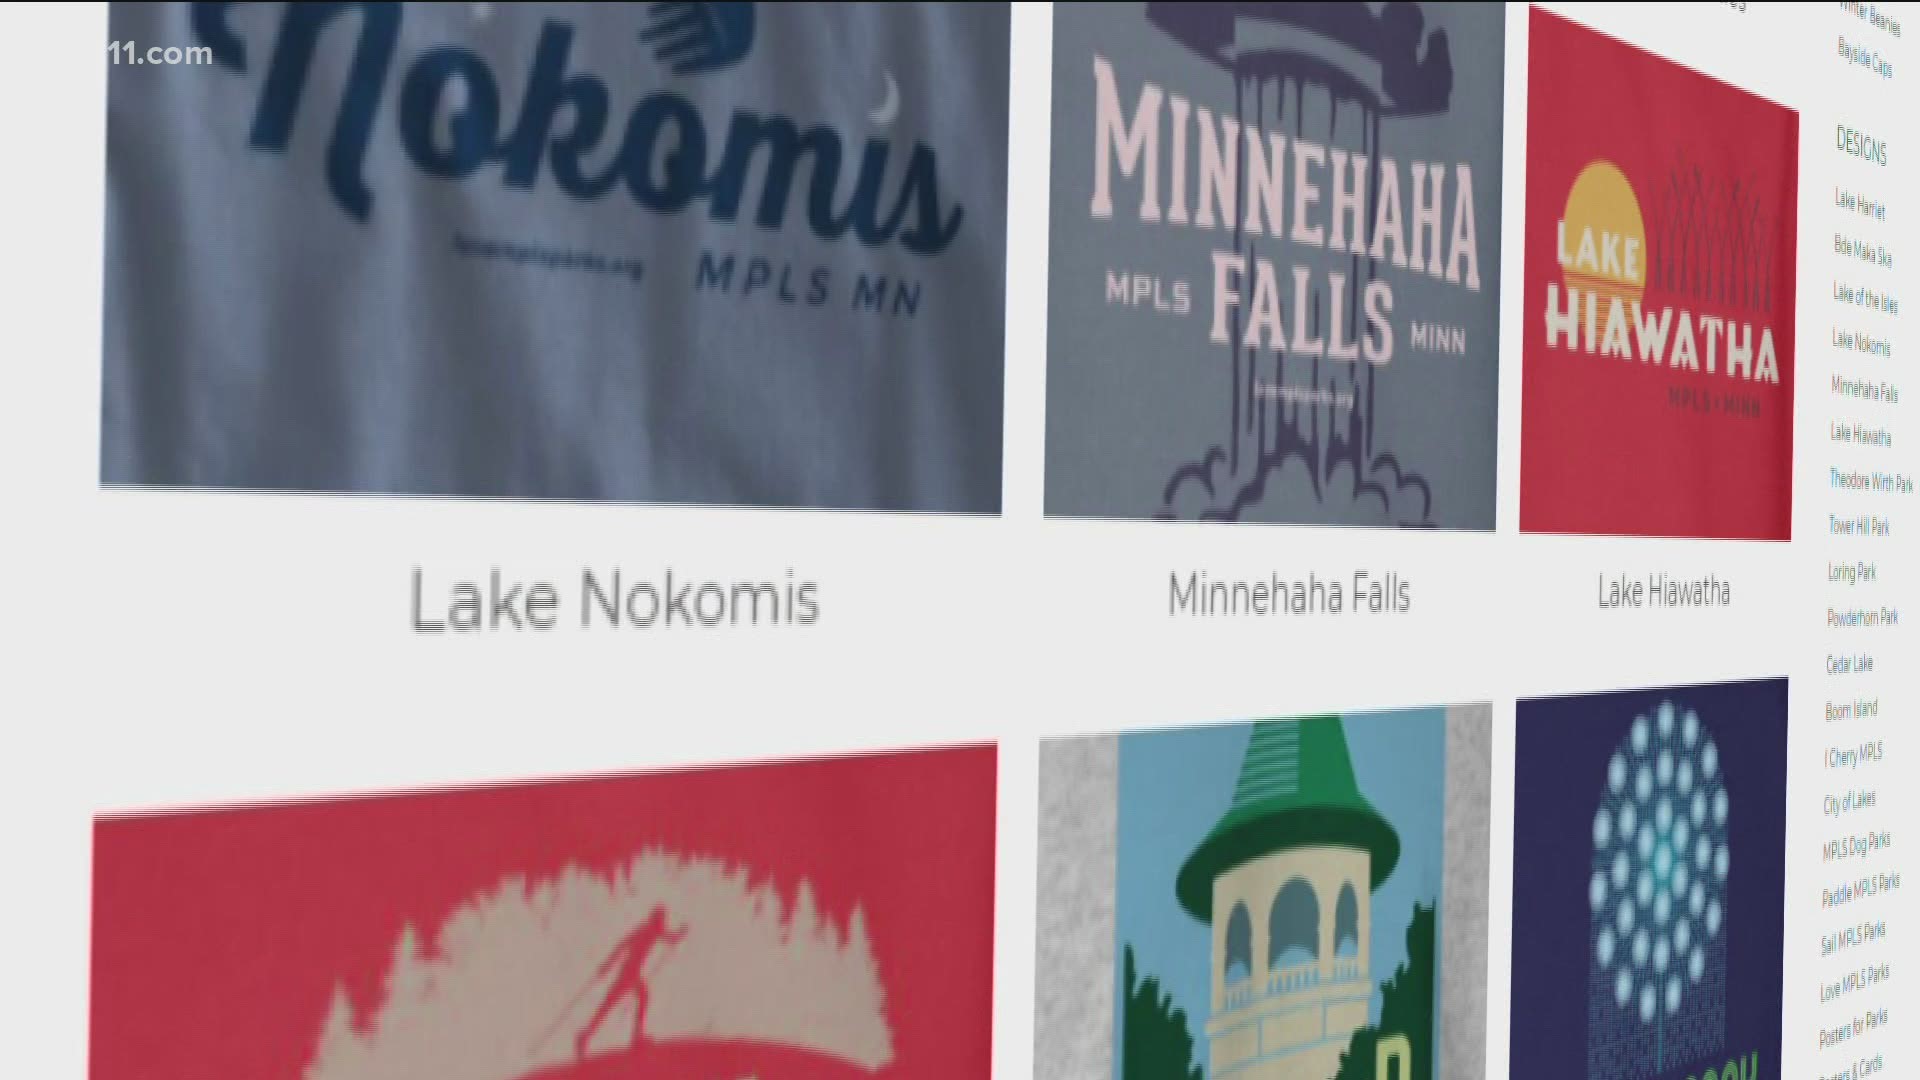 Most people rep their favorite sports teams or bands, but this local clothing brand spotlights Minneapolis parks.